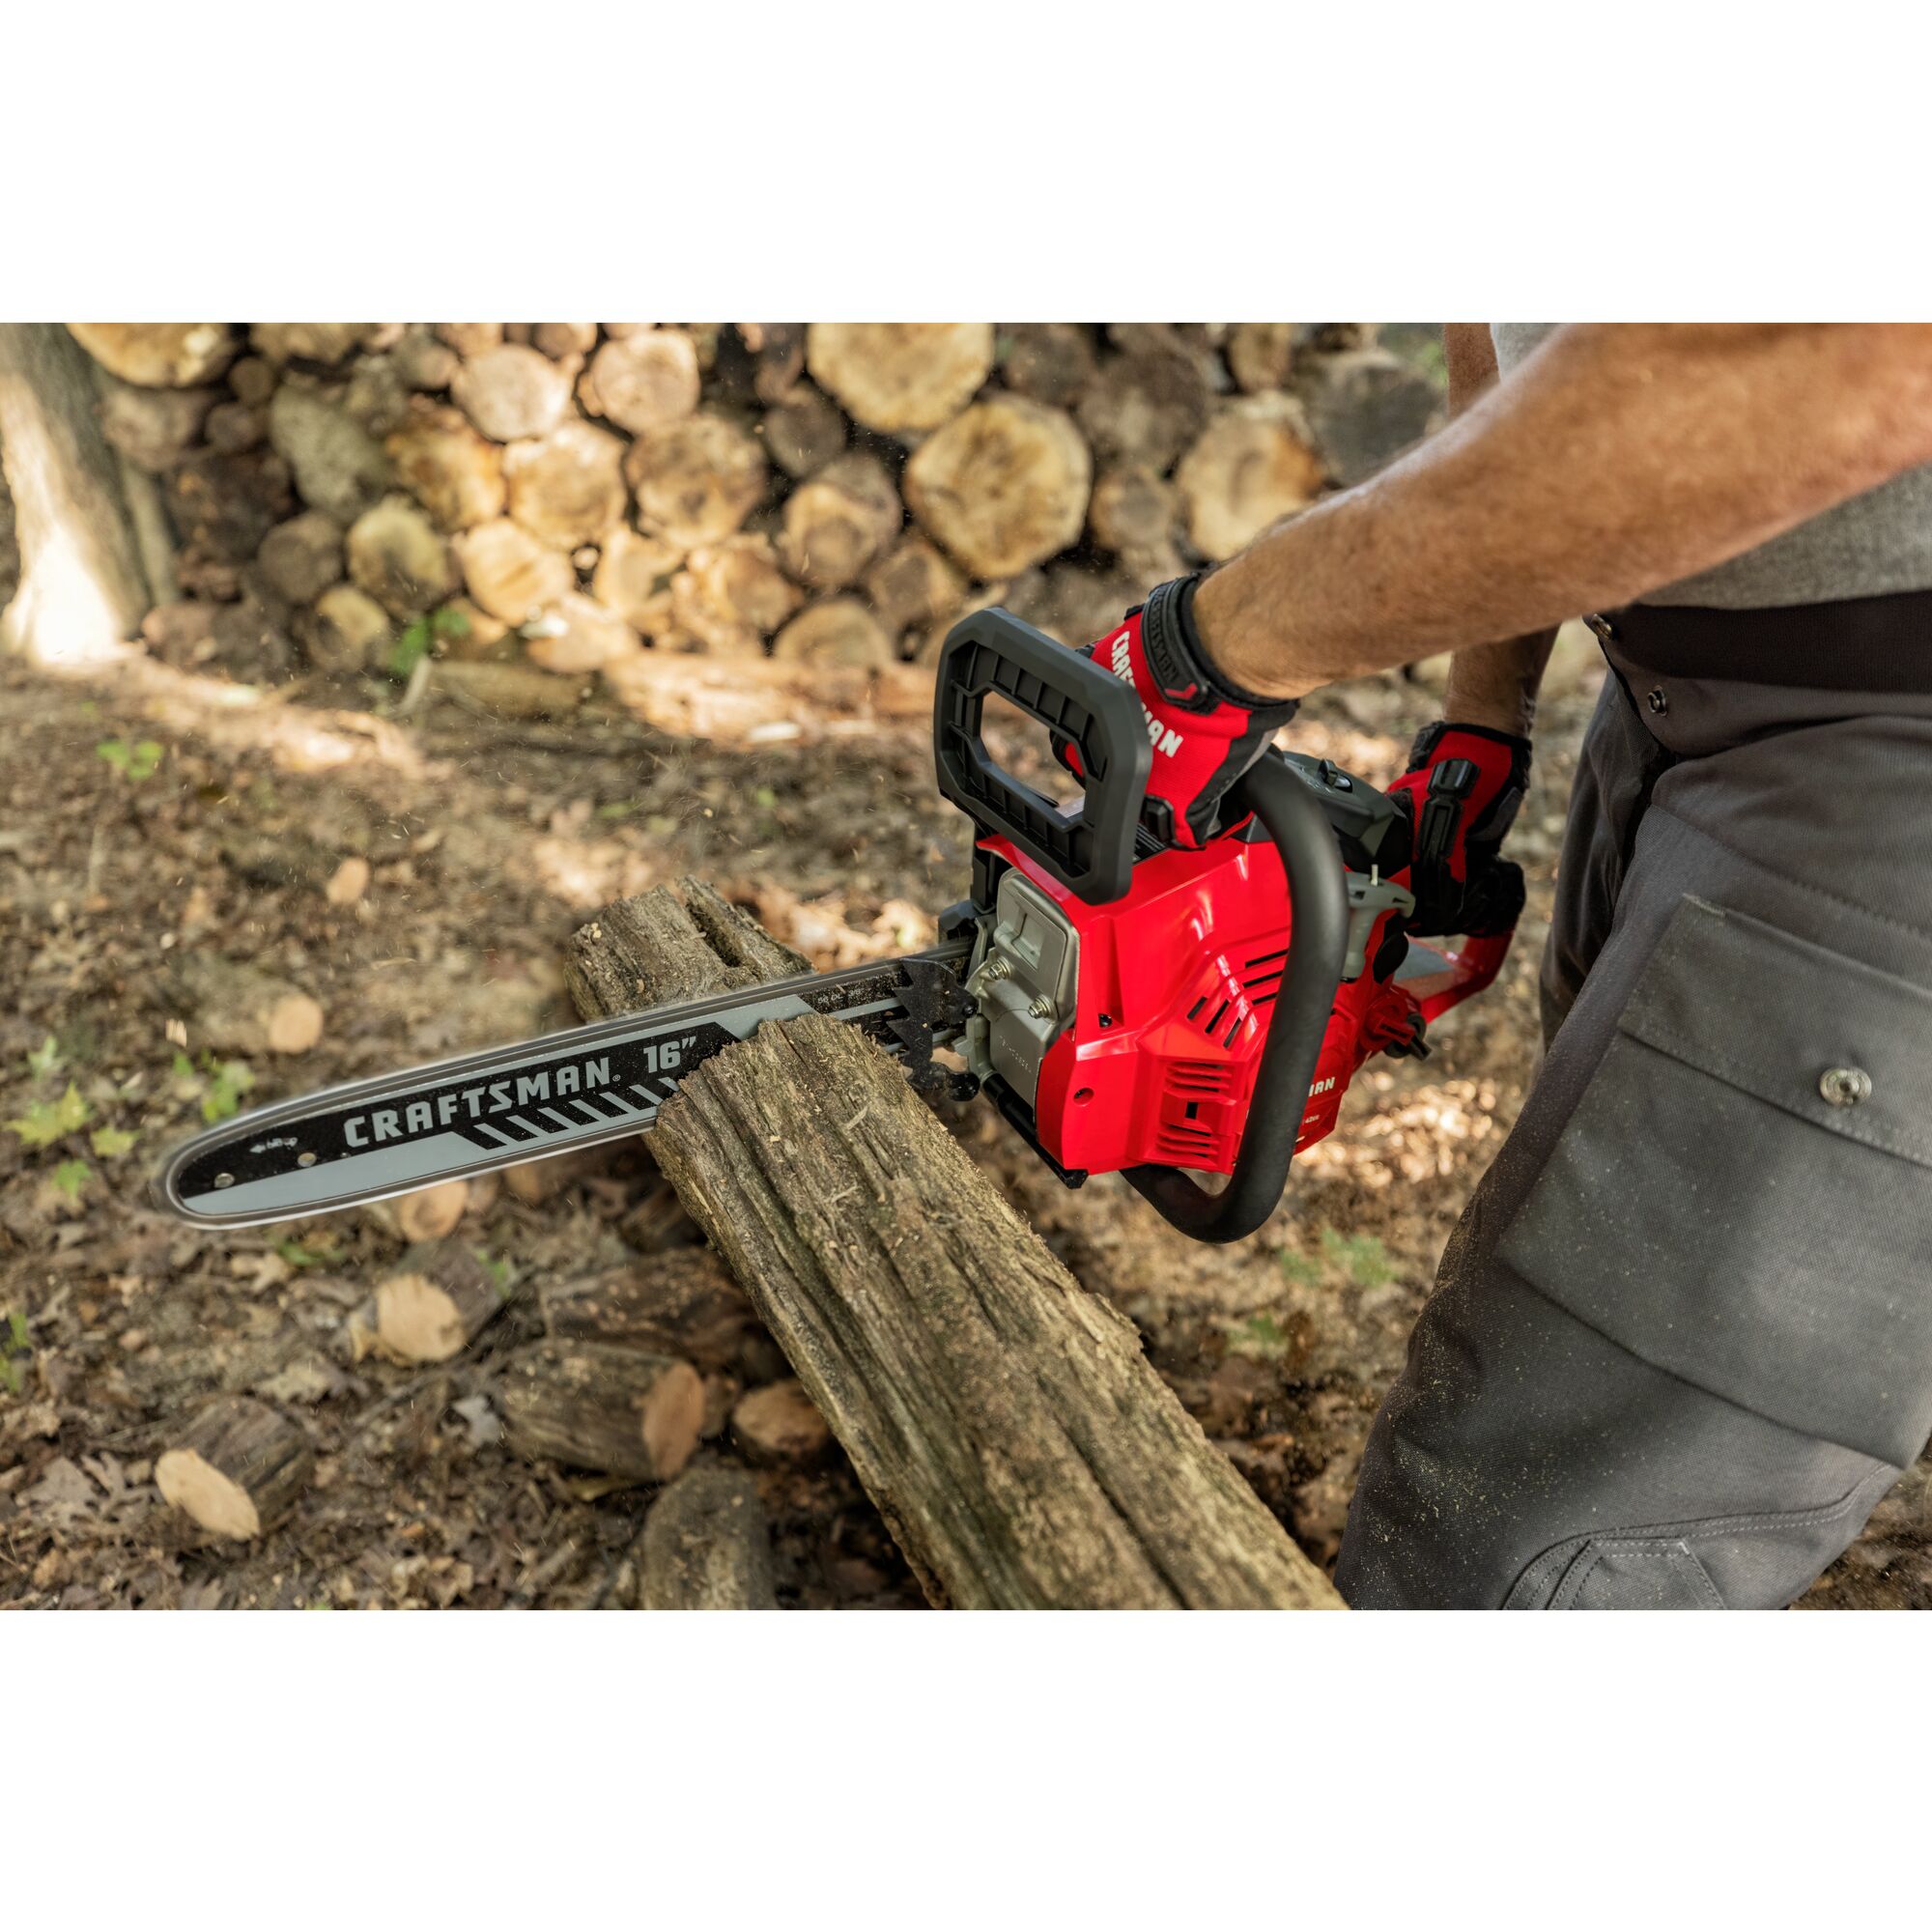 View of CRAFTSMAN Chain Saws  being used by consumer